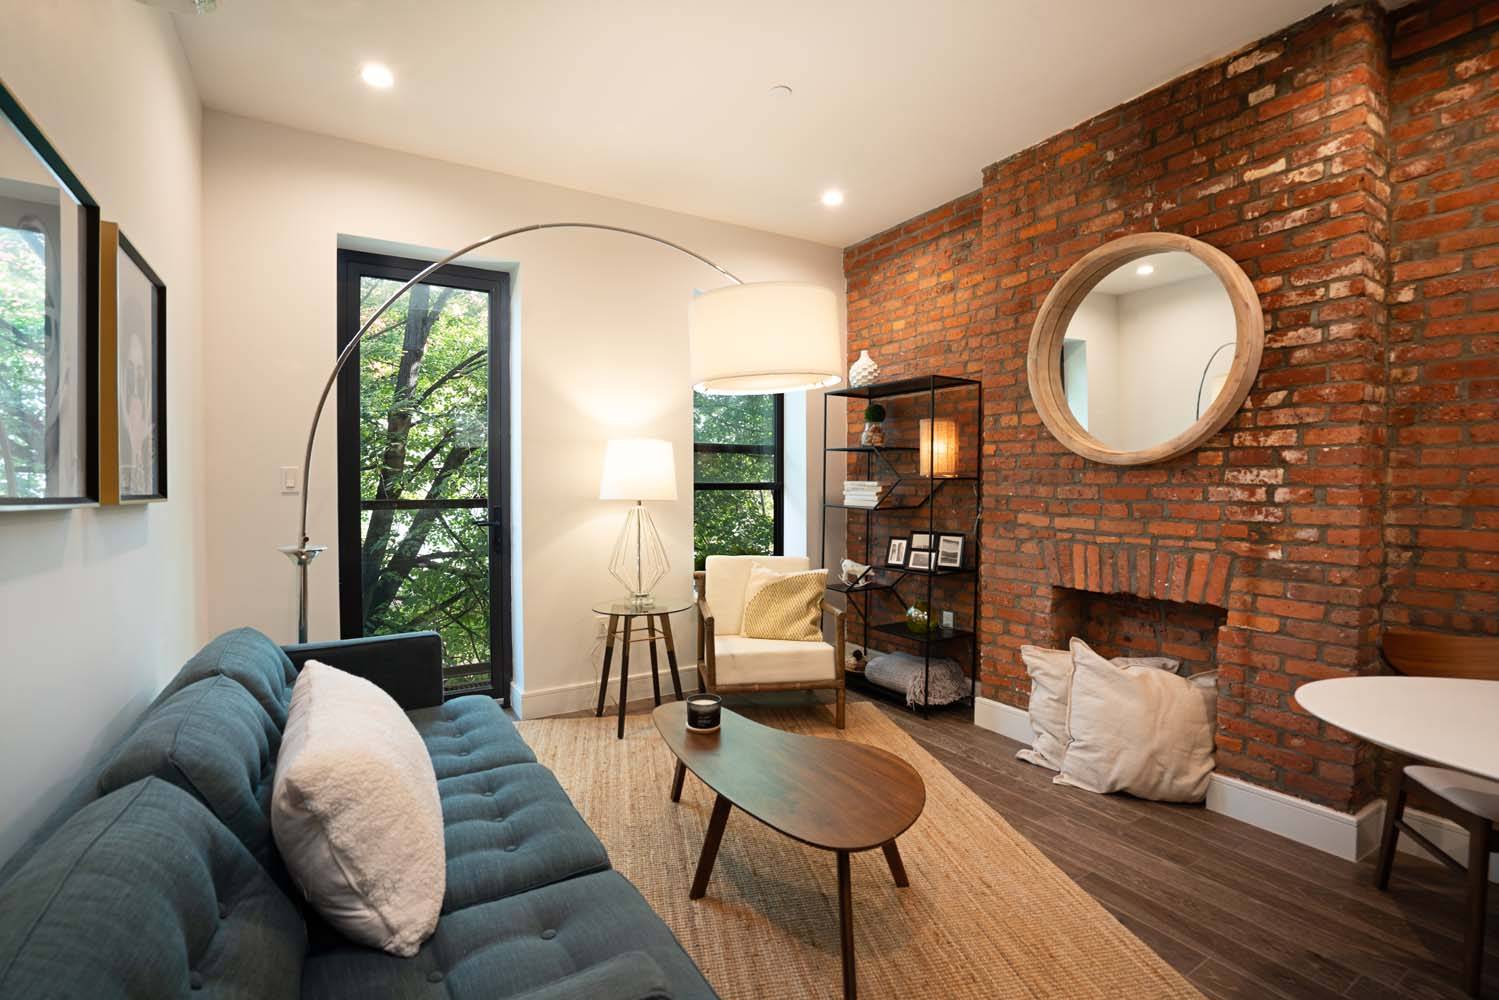 Welcome to 66 Steuben. A collection of 6 condos in the heart of Clinton Hill.